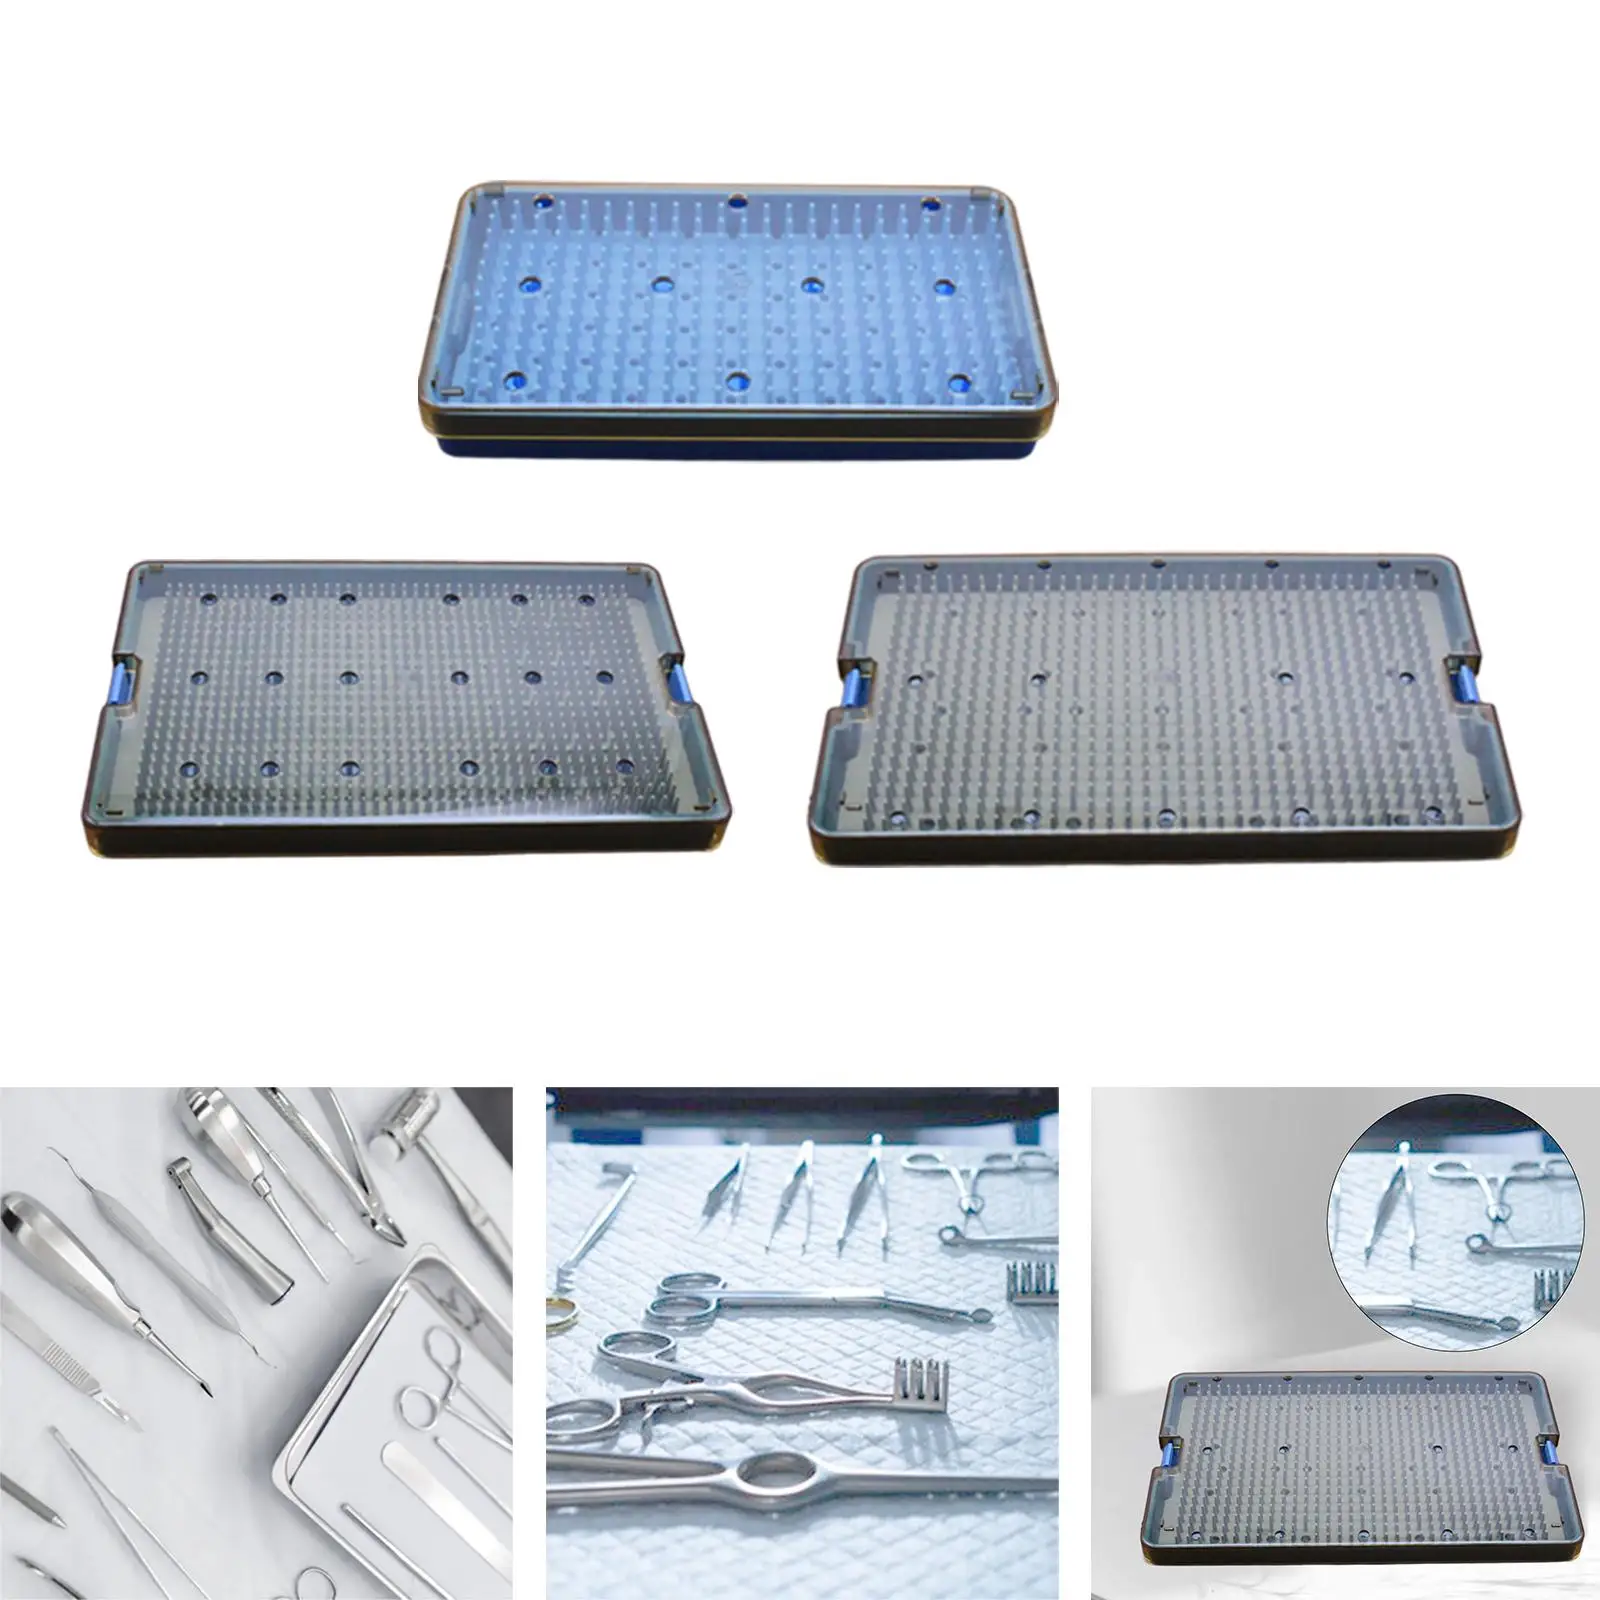 Silicone Sterilization Cassette Instruments Disinfection Box Disinfection Case Easy to Clean Sterilization Tray for Eye Tools